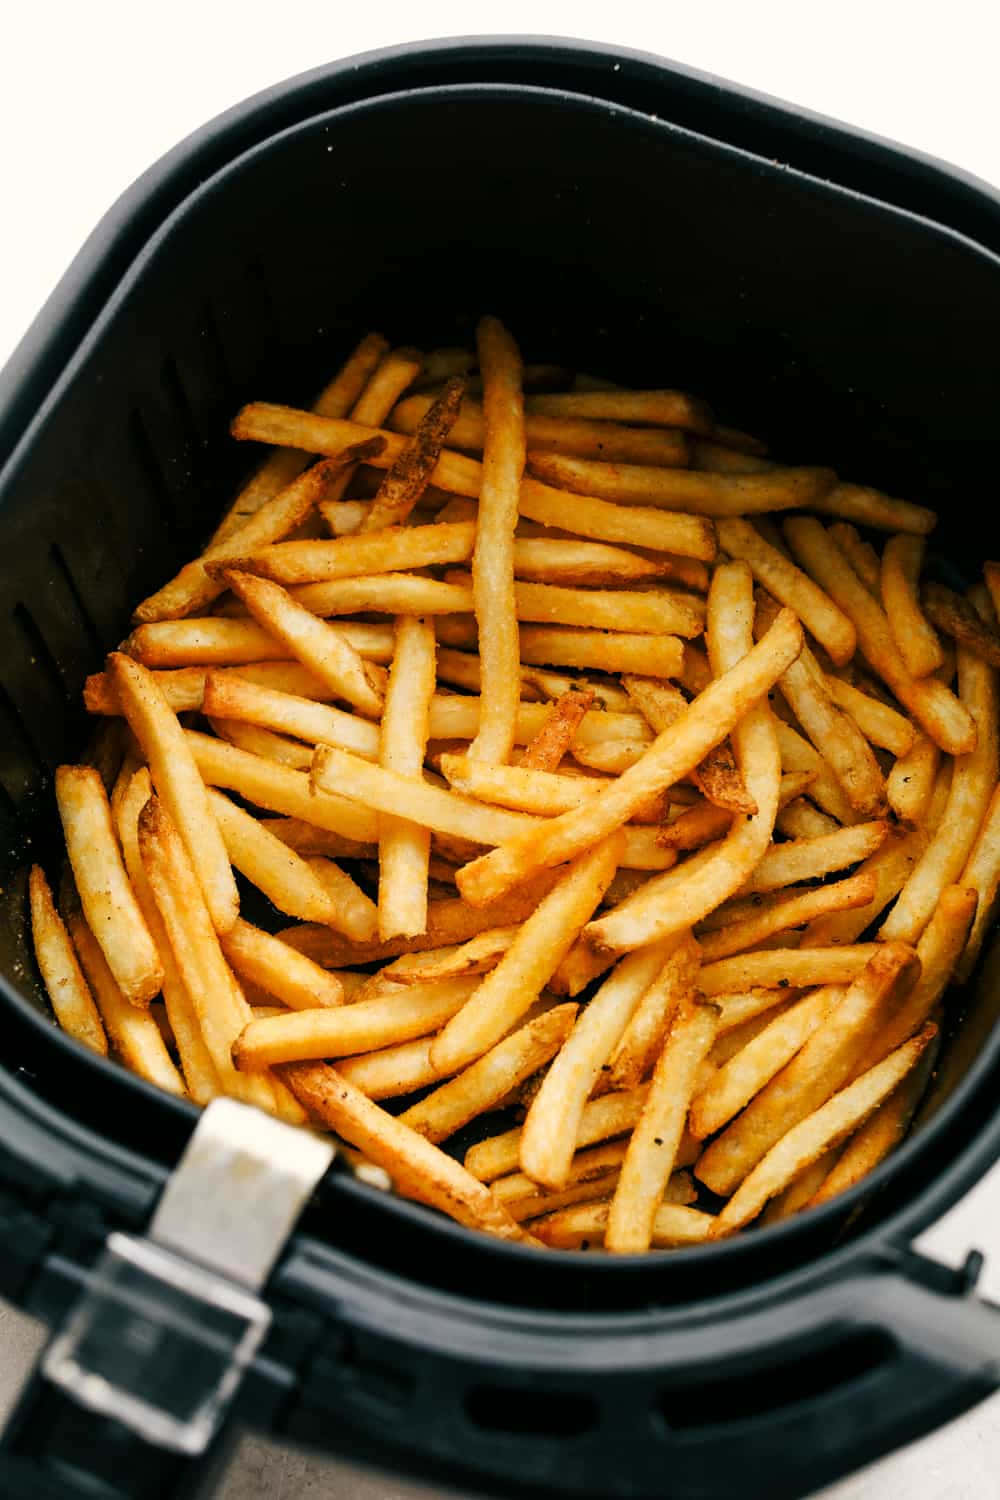 Crispy and Delicious, Enjoy the Flavor of French Fries